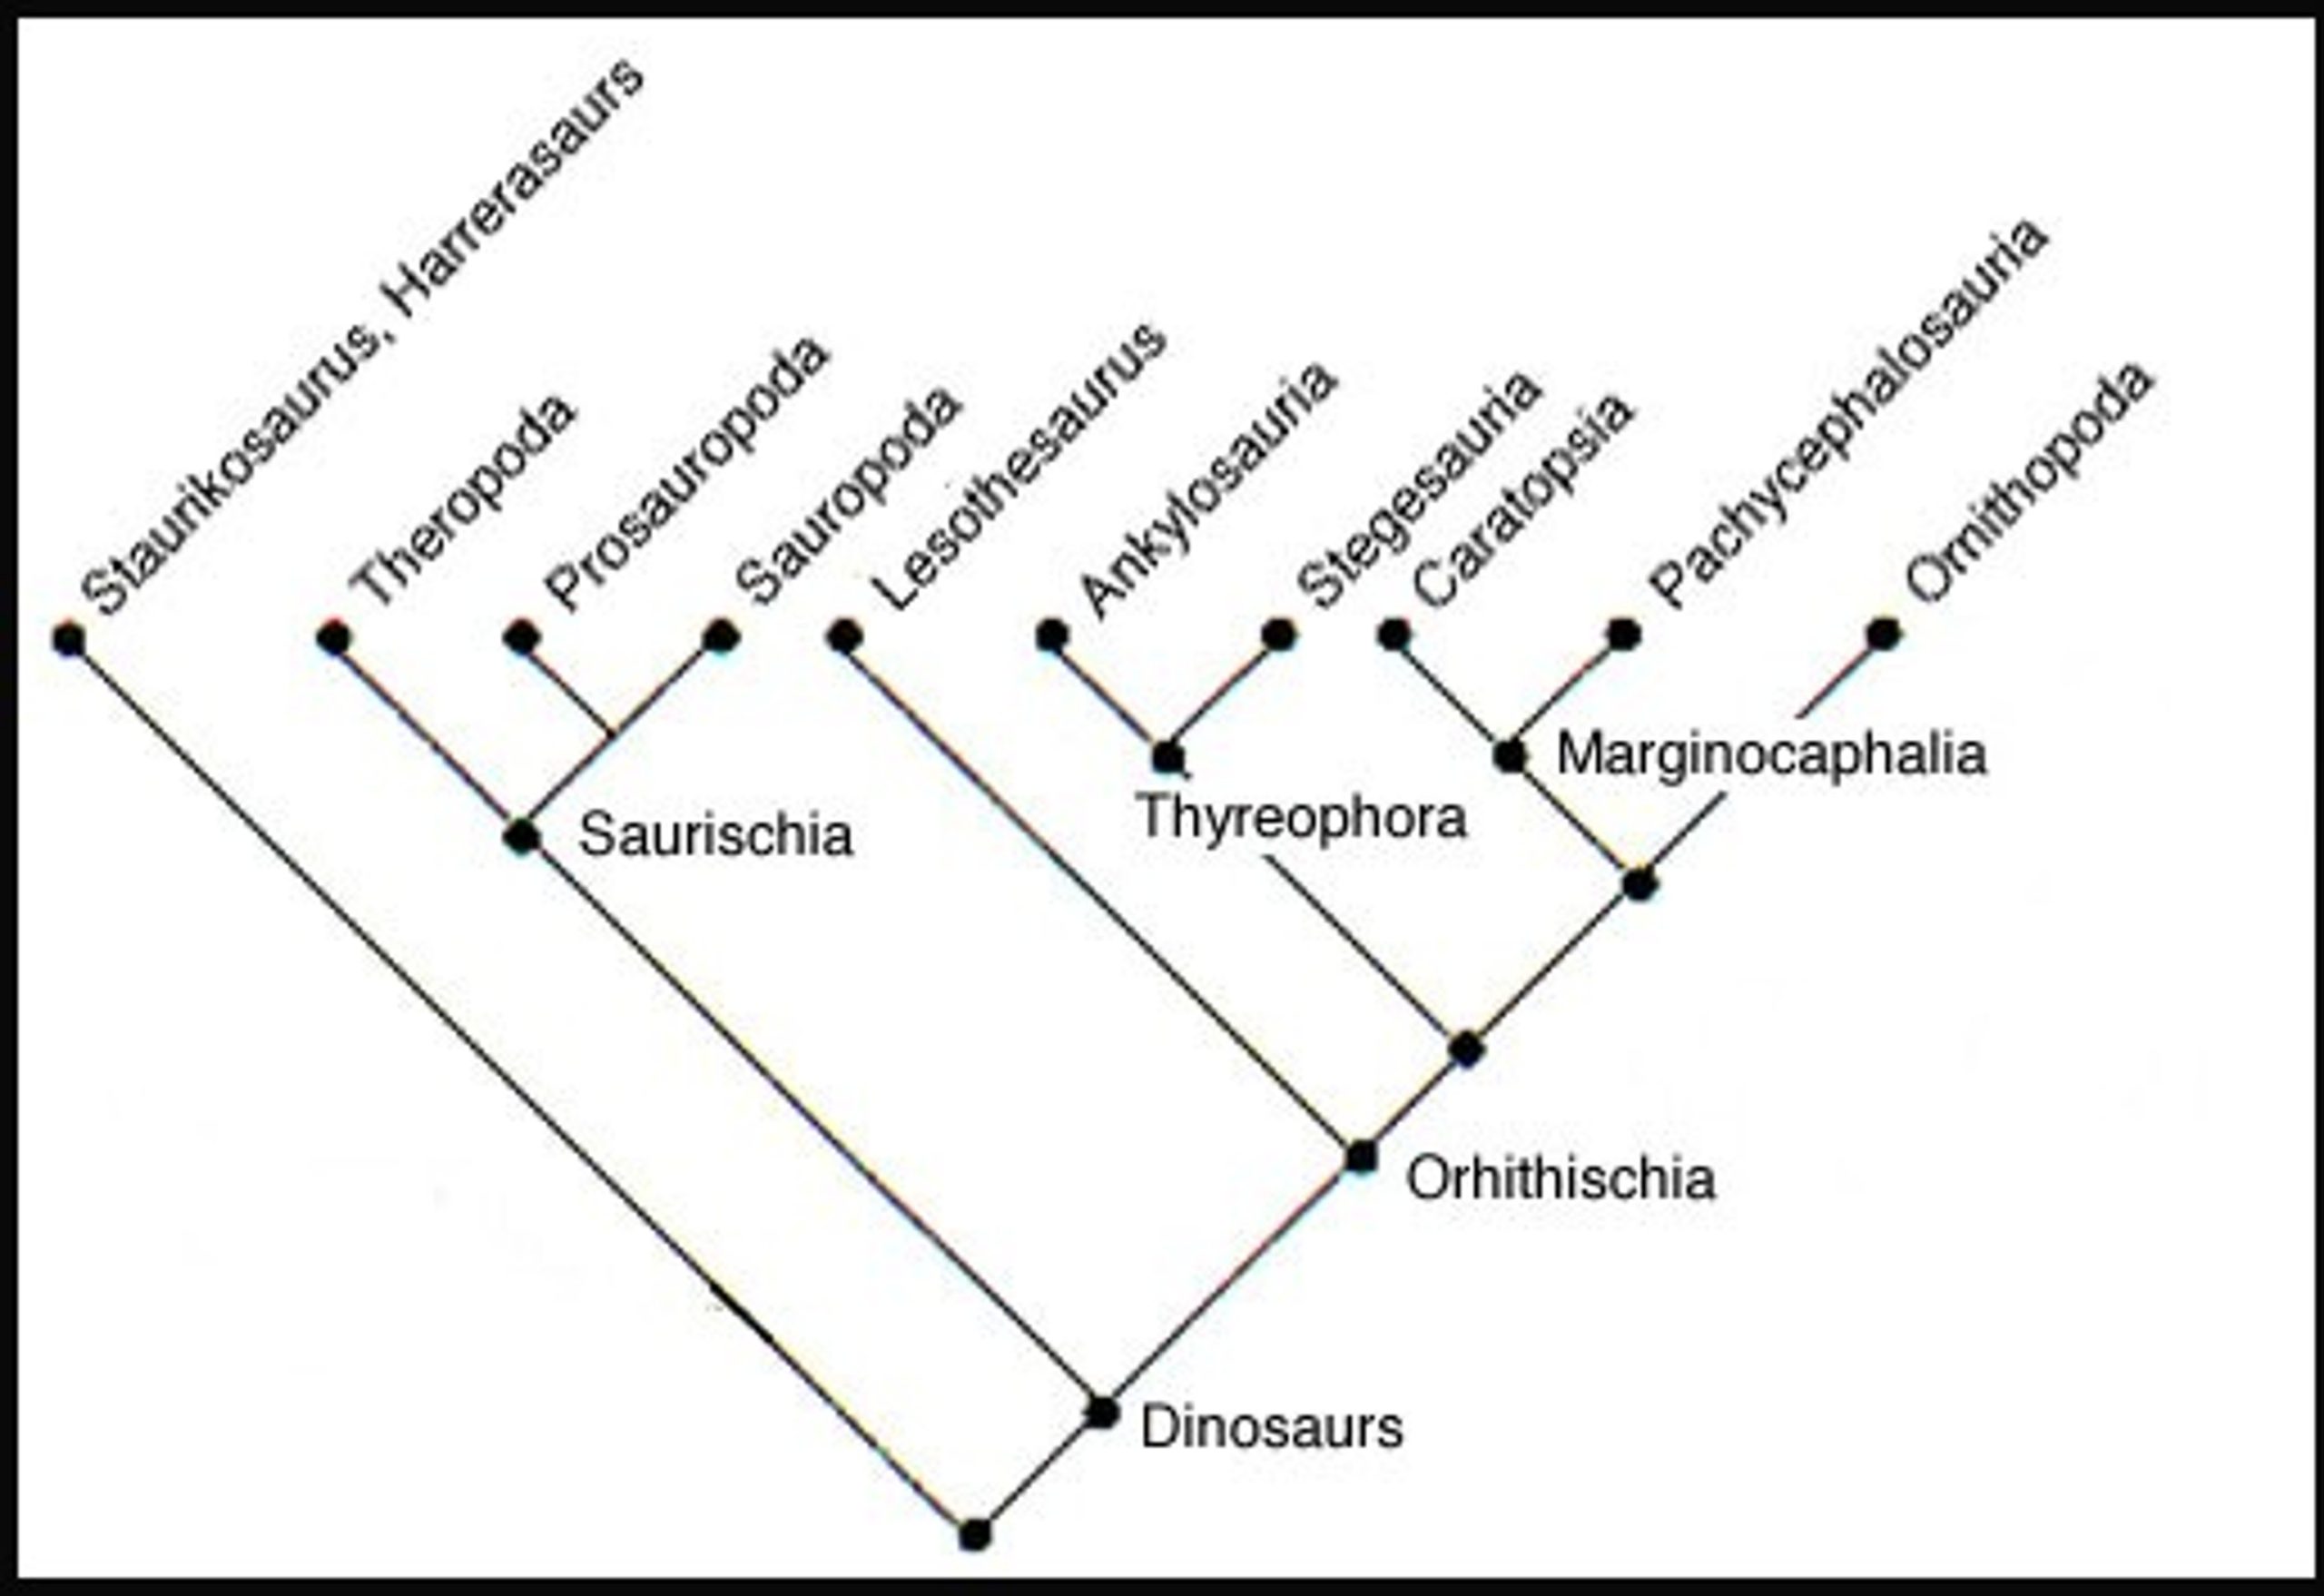 Proposed dinosaur relationship clade